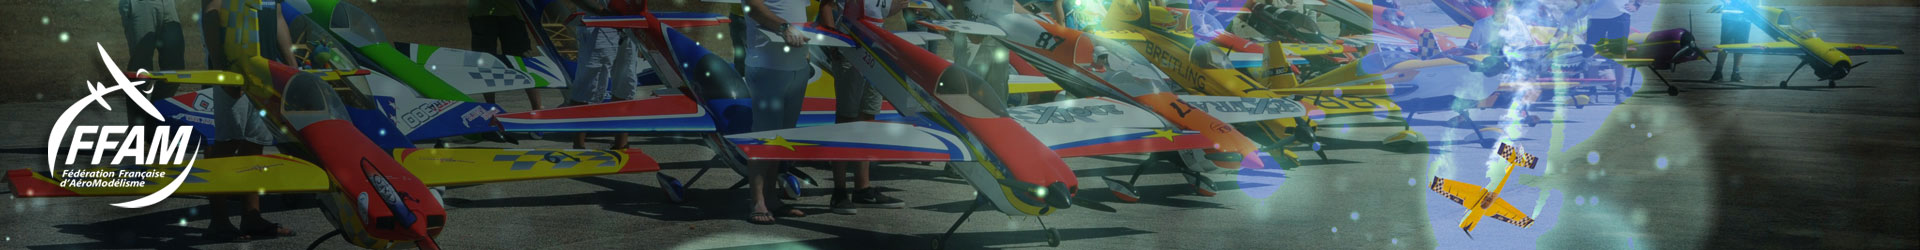 Lectoure Scale Model Aerobatic Cup 2019